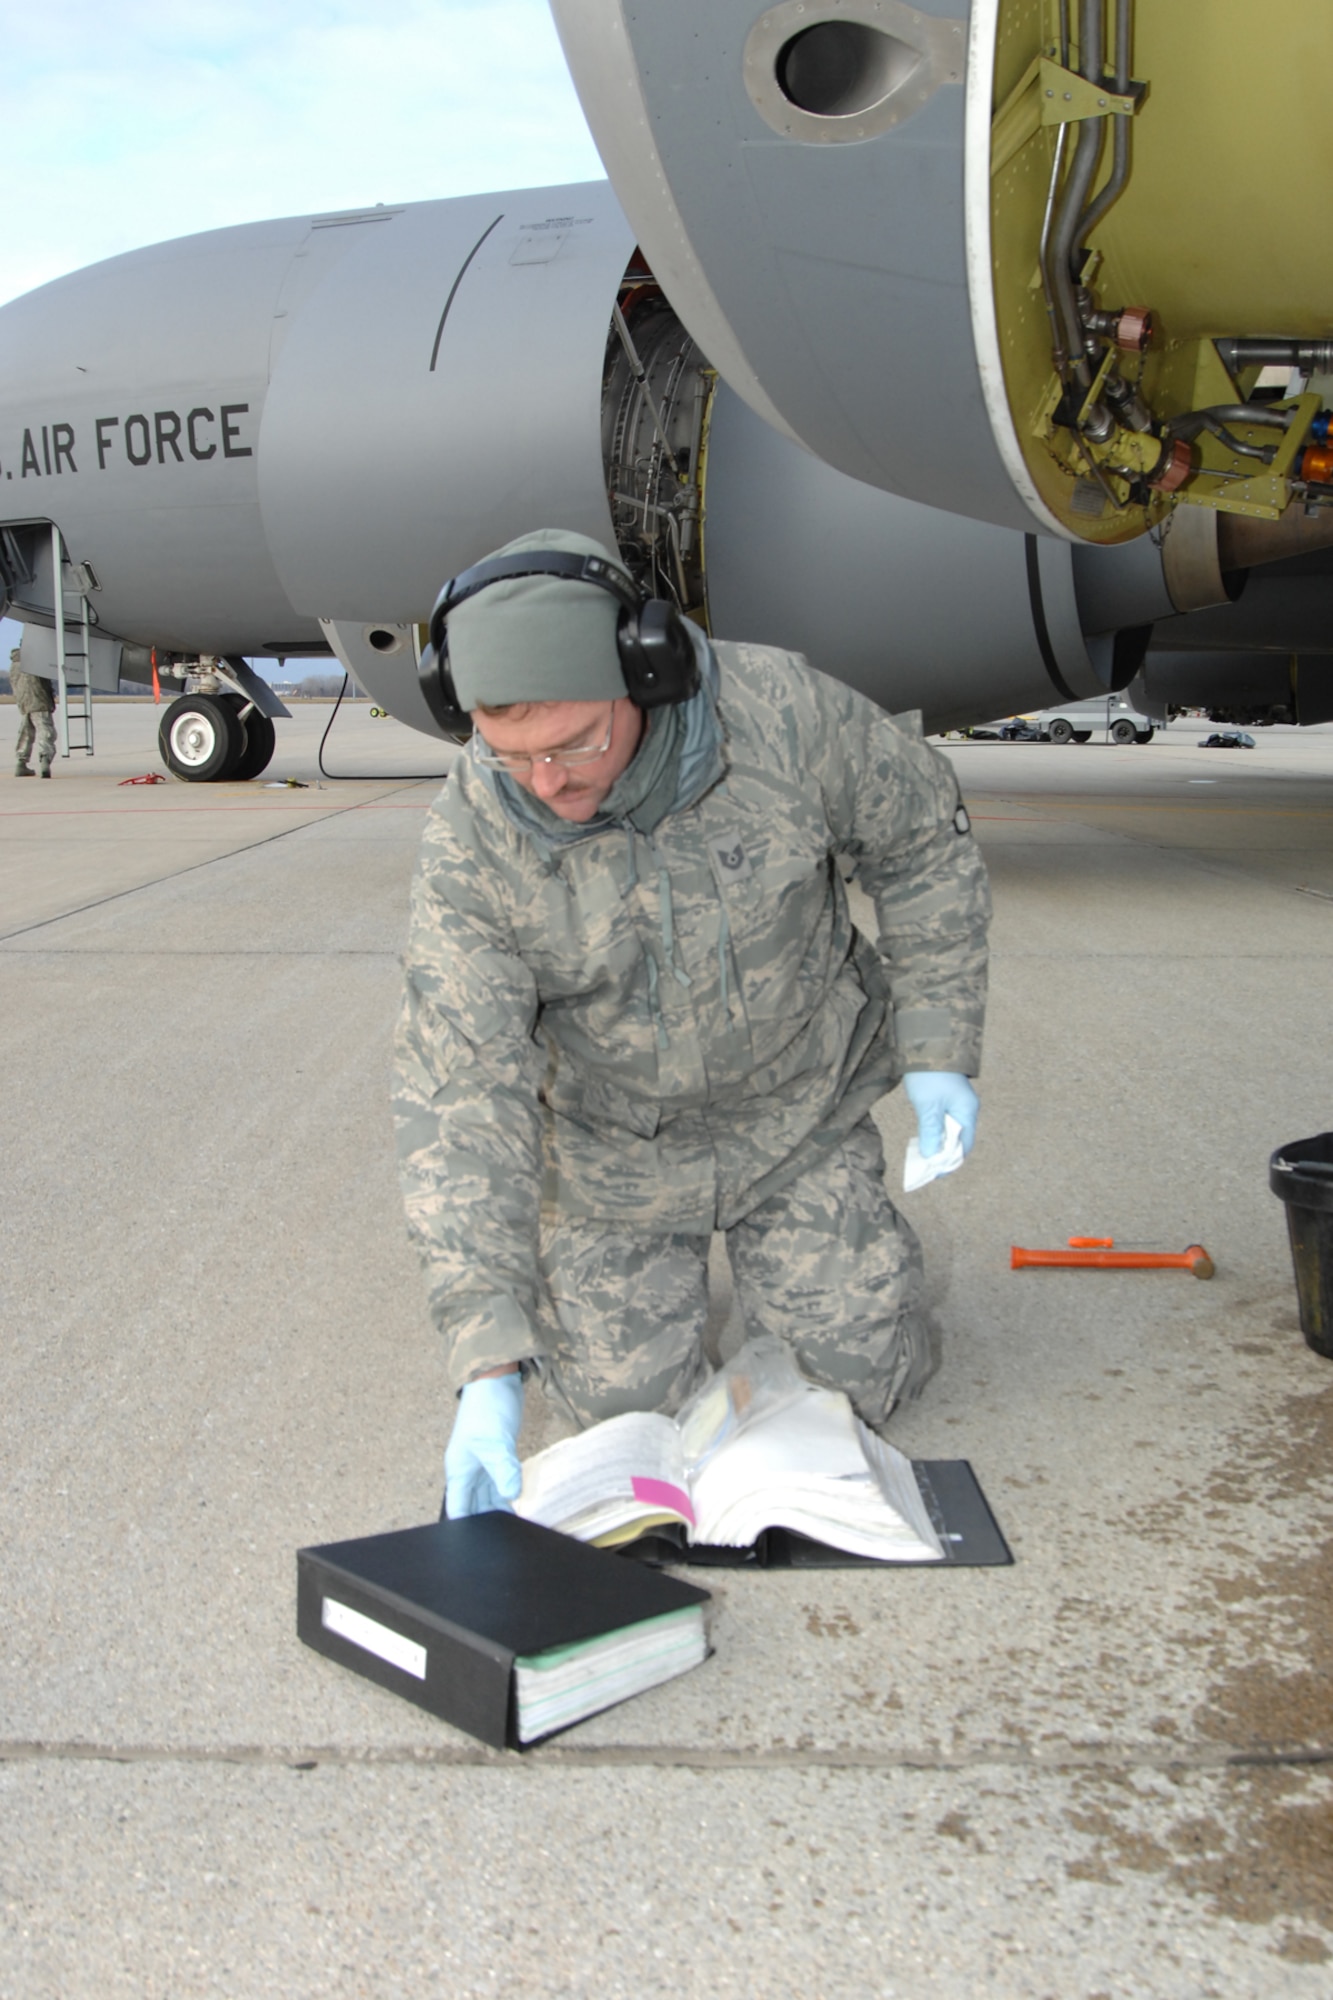 Technical Sgt. Richard Fisher reviews an Air Force technical order prior to performing routine maintenance on the engine of a KC-135 Stratotanker at Selfridge Air National Guard Base, Mich., Dec. 4, 2010. Maintenance personnel at Selfridge perform a series of regular inspections and preventative maintenance actions to ensure the KC-135s are mission ready. (U.S. Air Force photo by TSgt. Dan Heaton) (RELEASED)